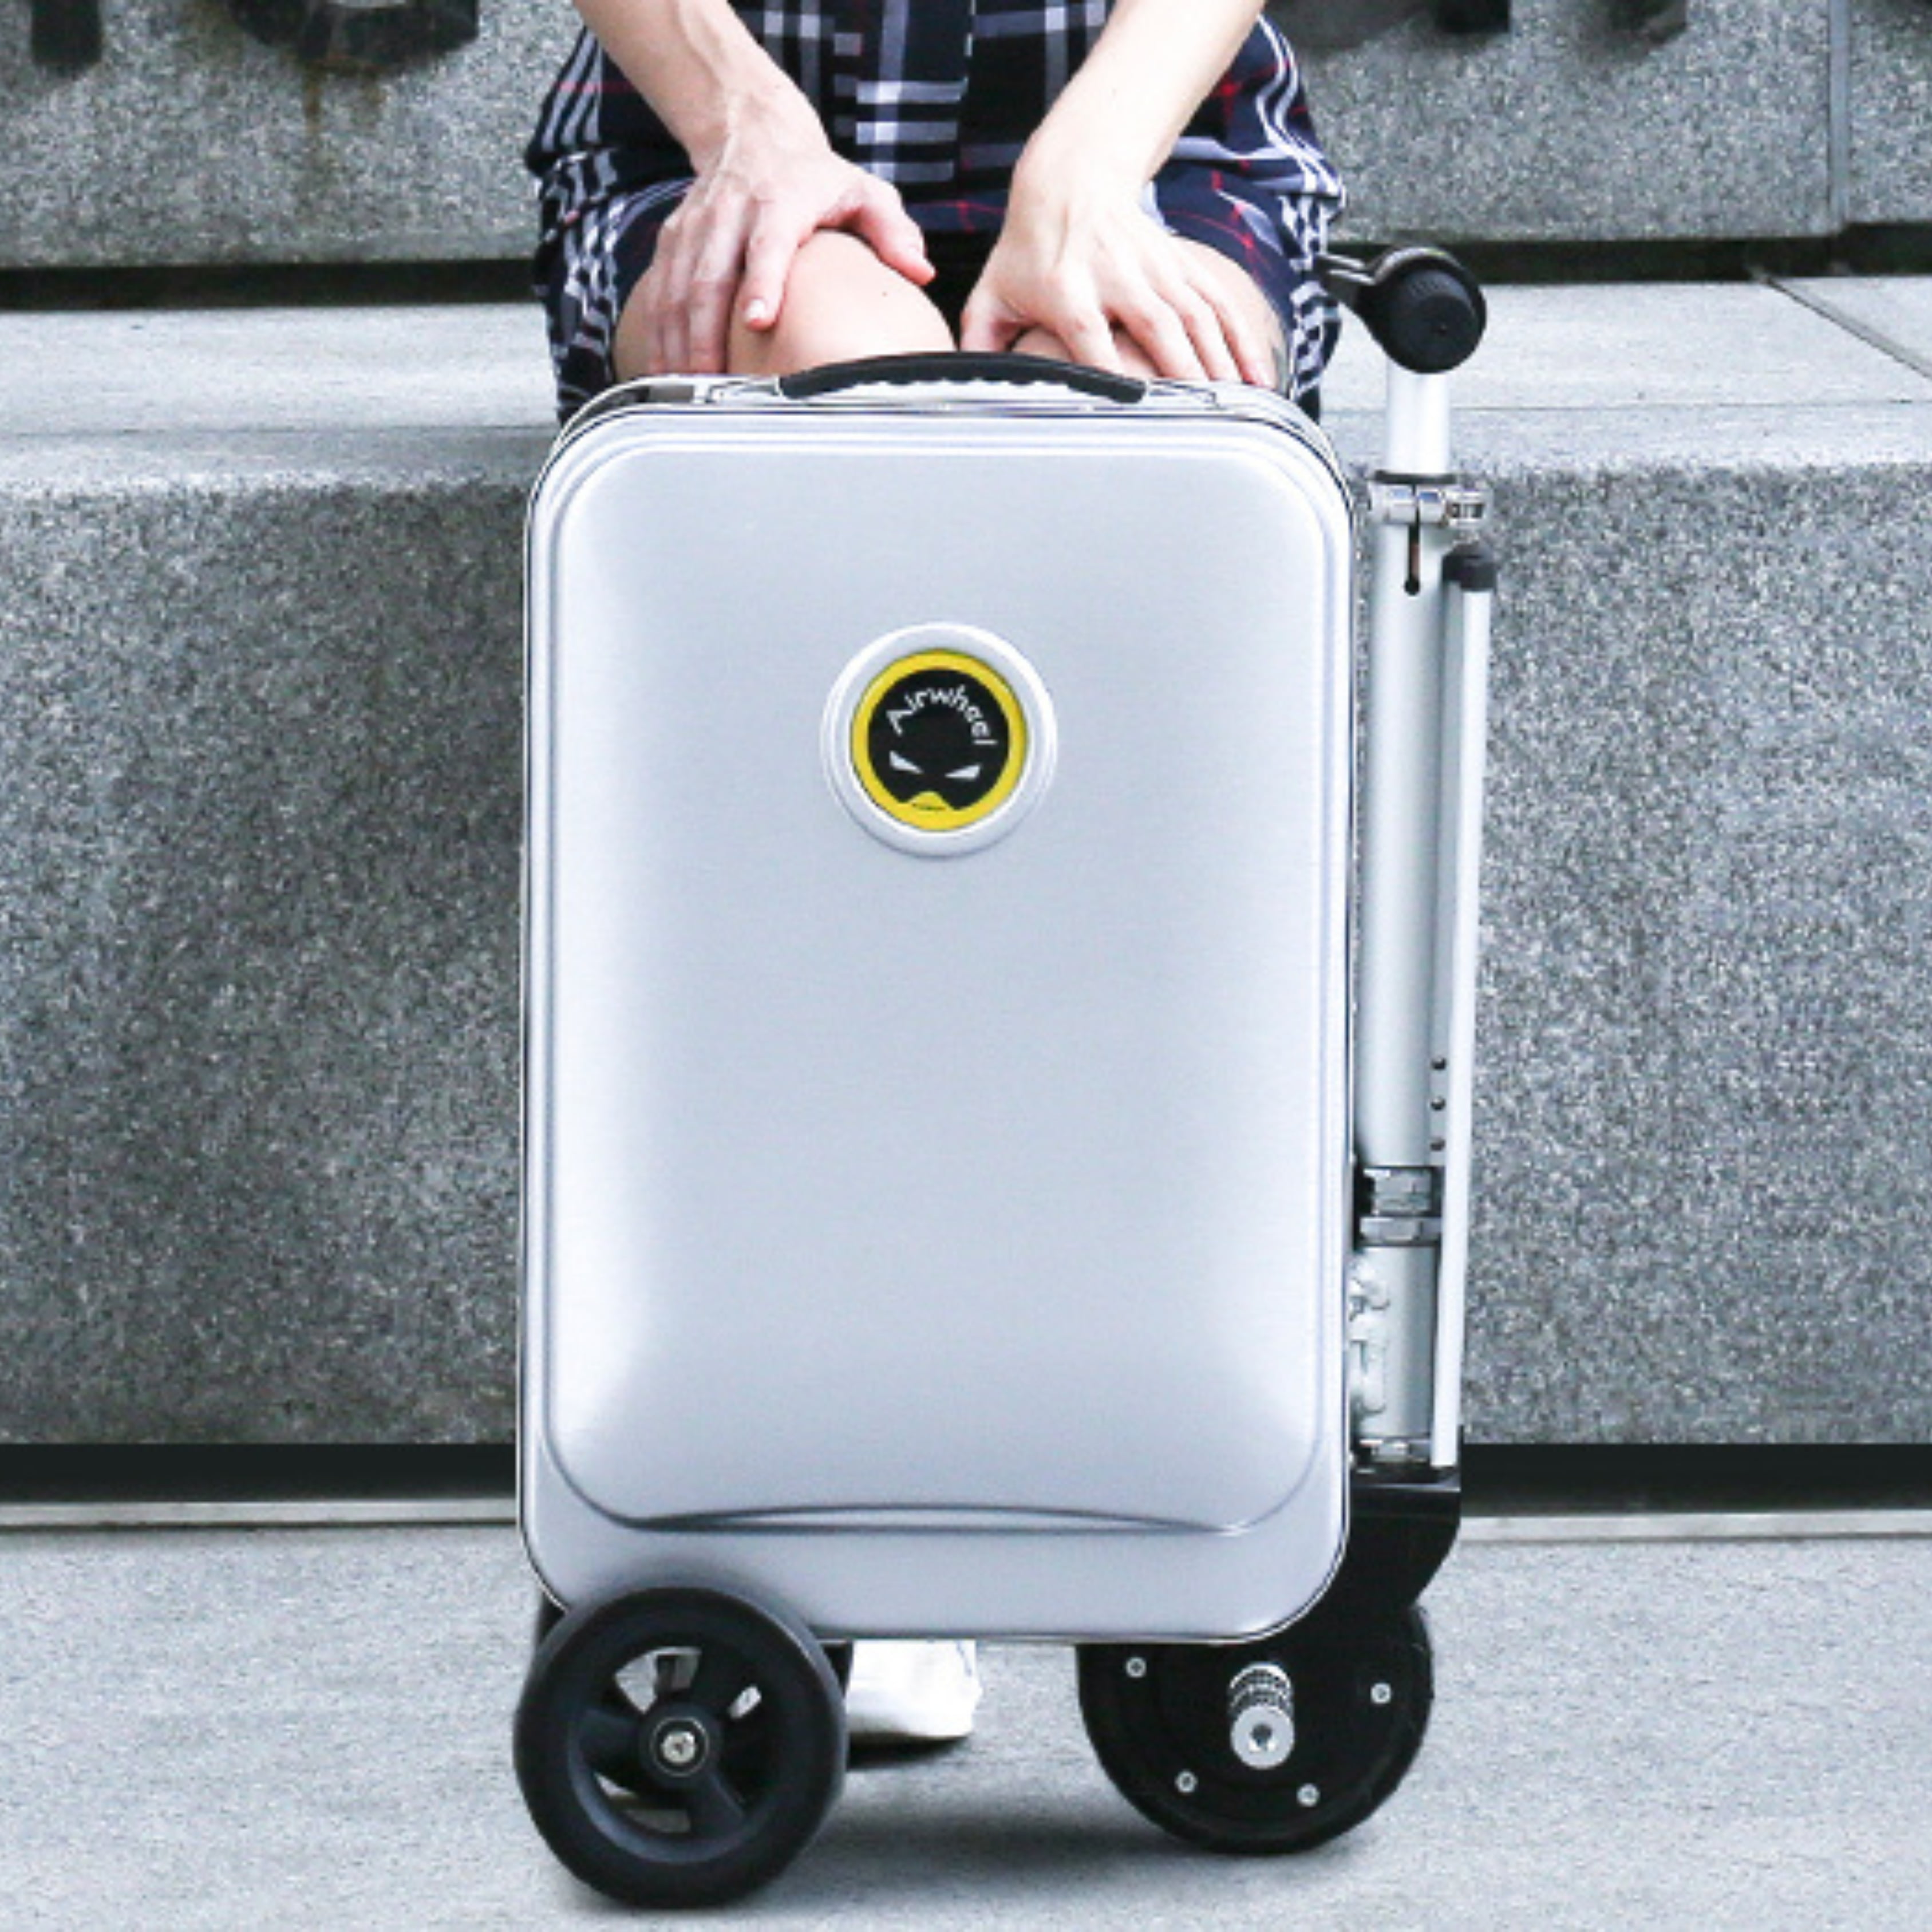 Airwheel SE3S Electric Mini Smart Sliver Scooter Luggage 20 Inch